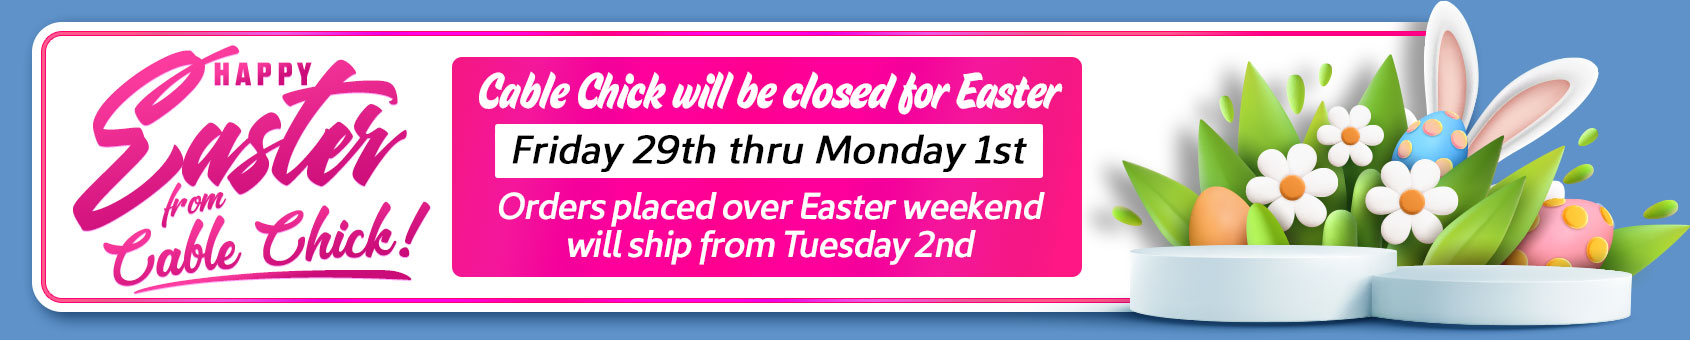 Cable Chick's will be closed for the Easter long weekend (Good Friday 29th to Monday 1st). Orders ship Tue 2nd.